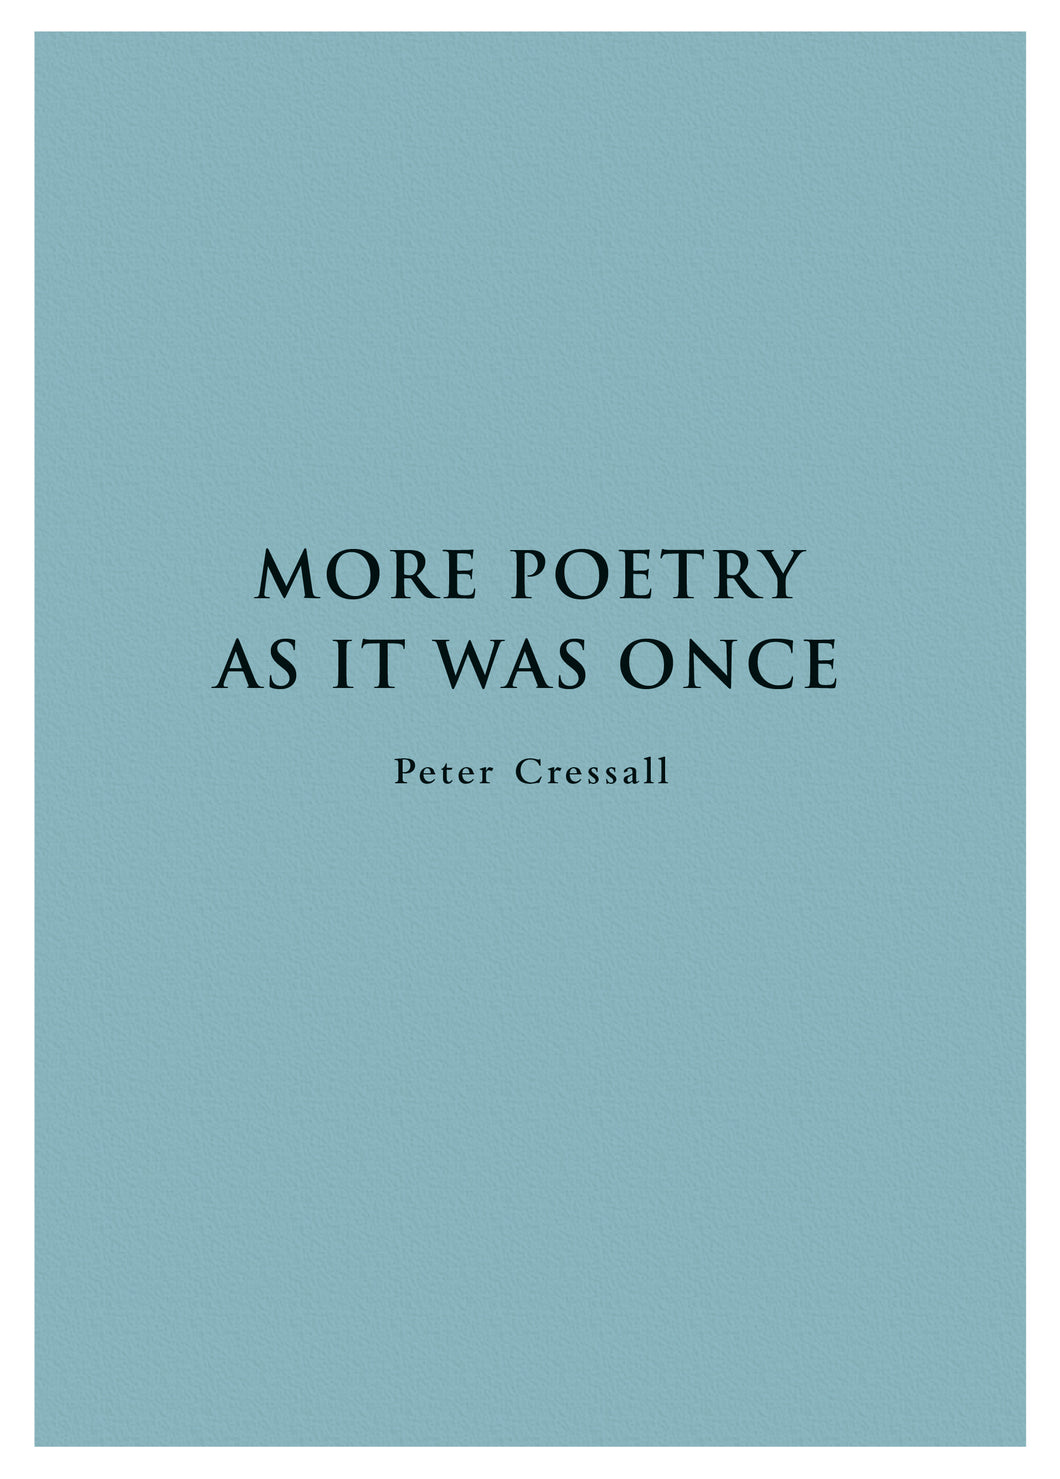 More Poetry As It Once Was - Peter Cressall